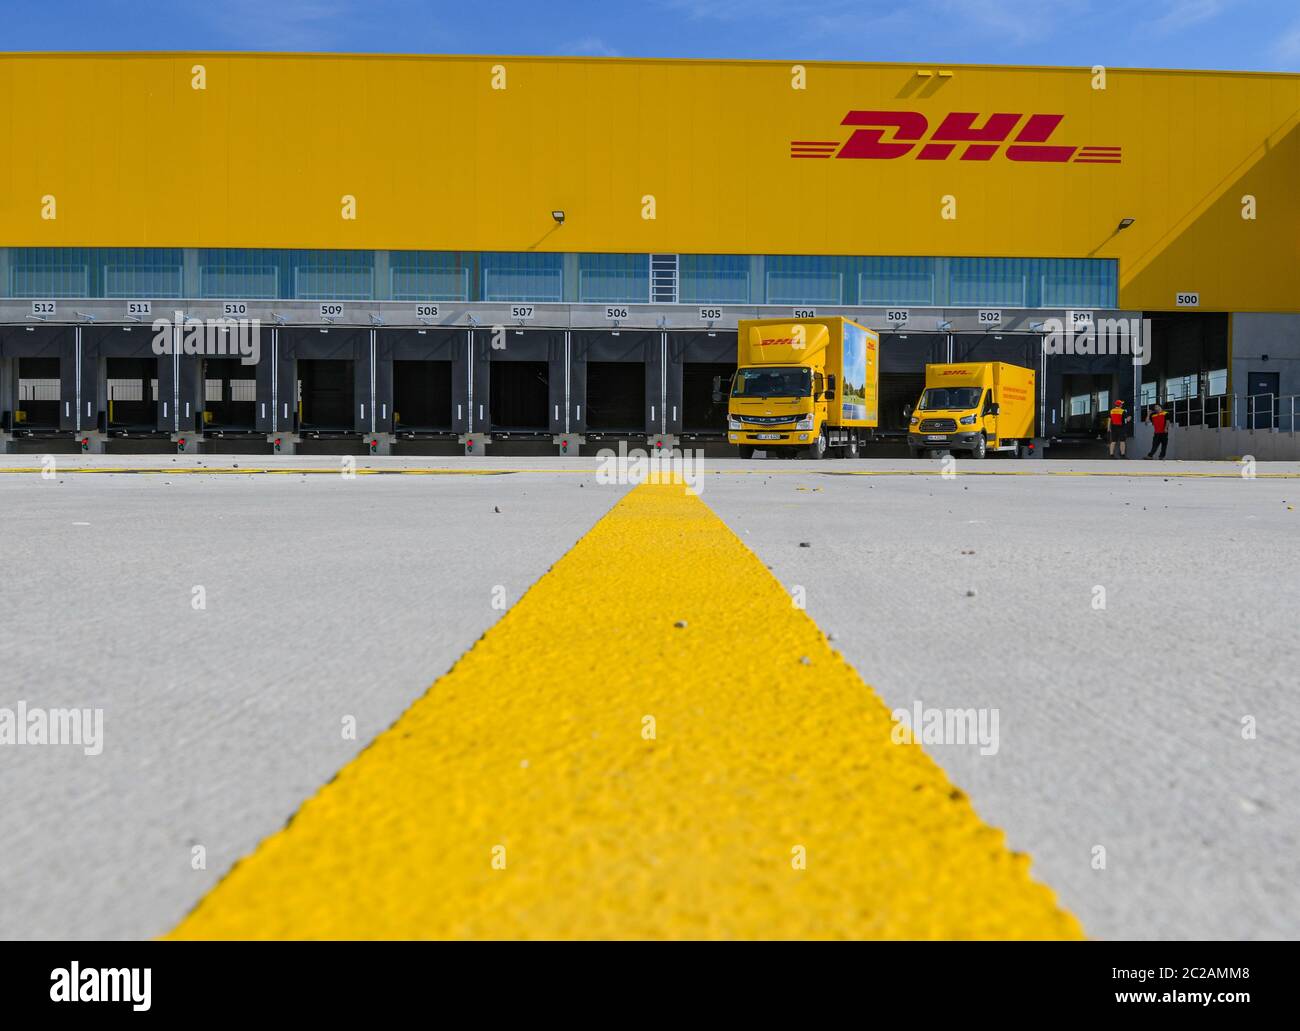 Ludwigsfelde, Germany. 17th June, 2020. View of the new construction of a parcel centre of the Deutsche Post. On the same day the first construction phase was completed with the completion of the shell for the new parcel centre. In future, up to 50,000 parcels per hour will be sorted in the parcel centre. According to the company, the third DHL 'mega parcel centre' in Germany and one of the most modern in Europe is being built on around 165,000 square metres. More than 600 new jobs will be created in the region. Credit: Patrick Pleul/dpa-Zentralbild/dpa/Alamy Live News Stock Photo